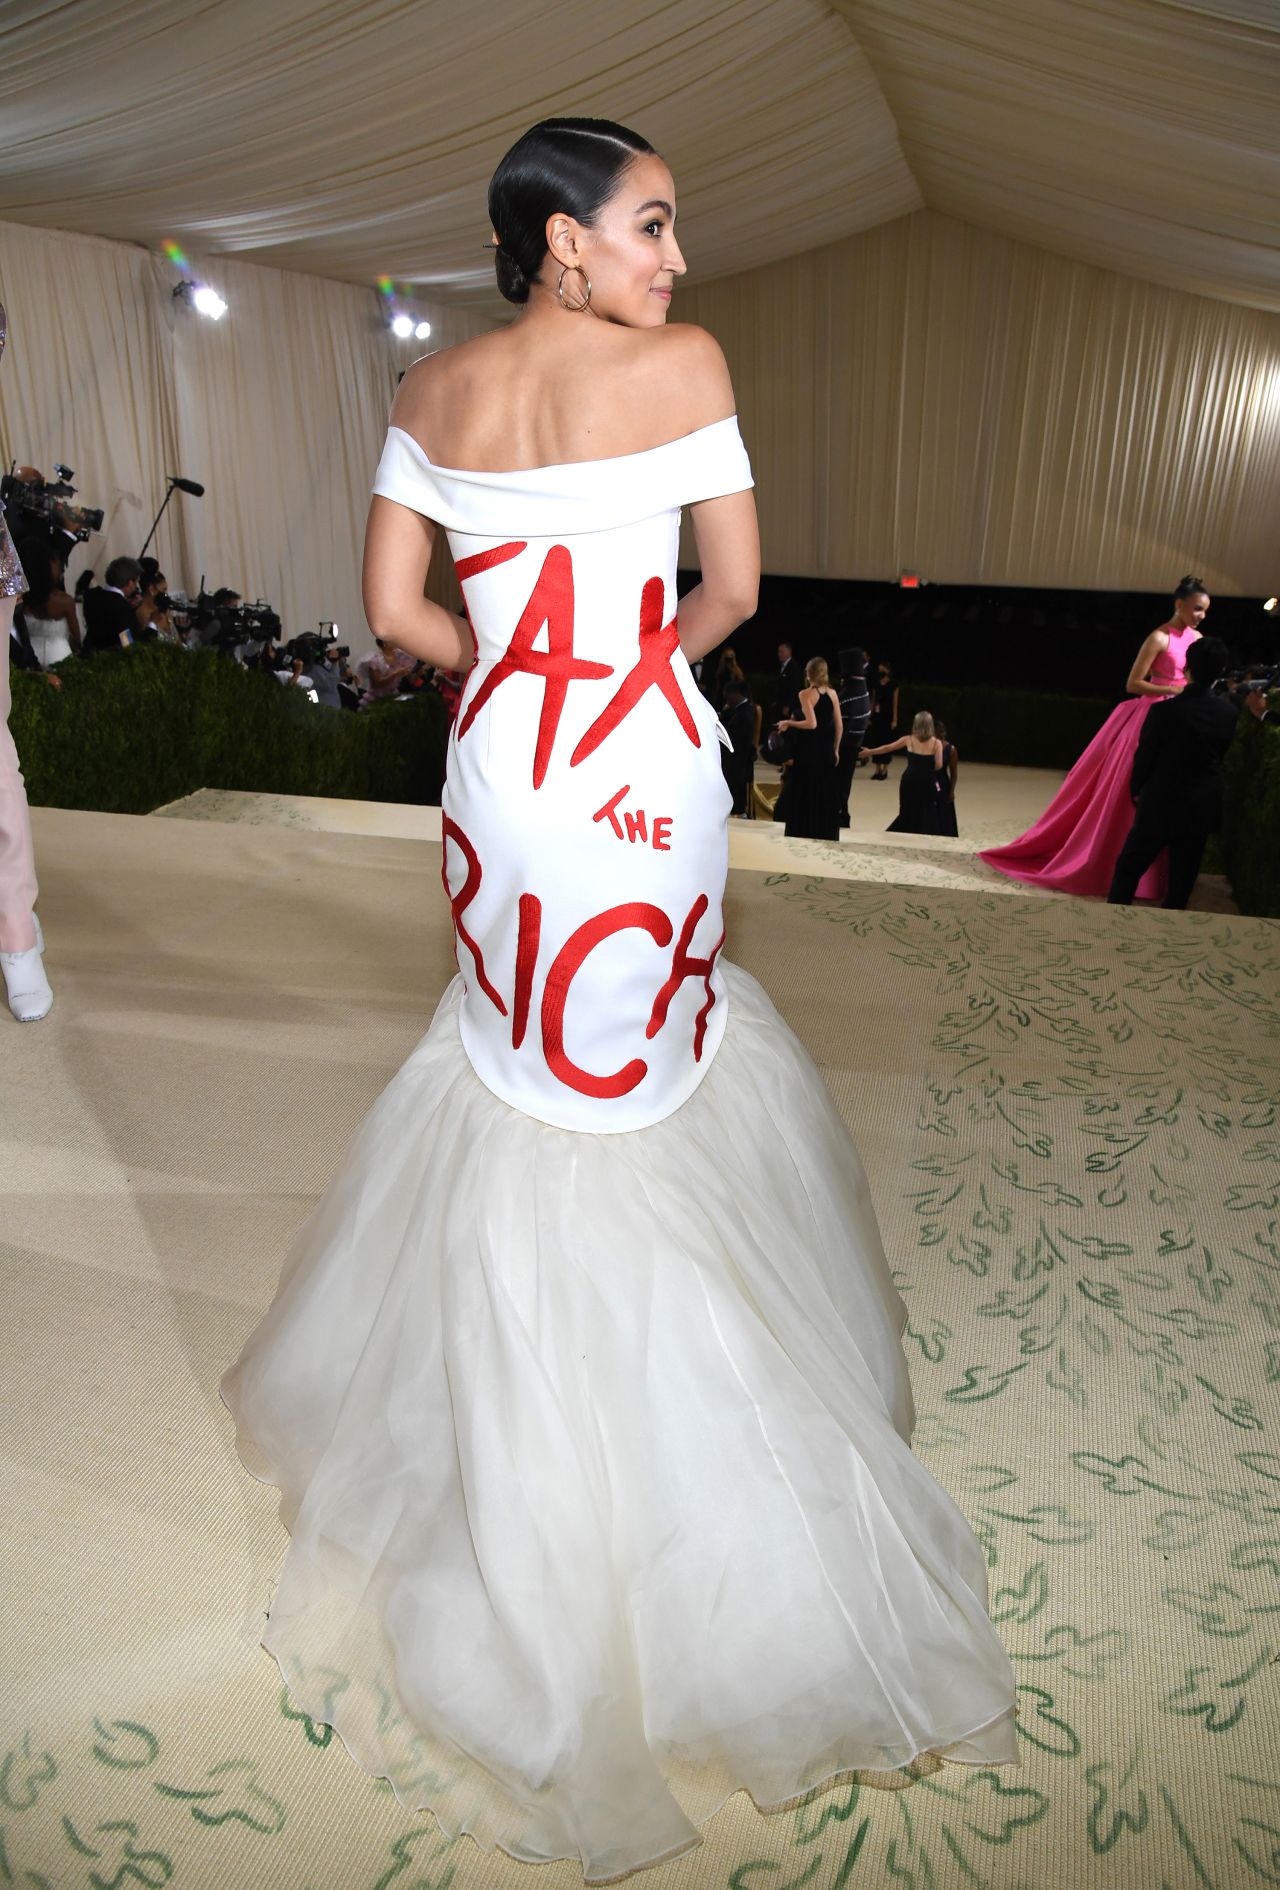 US Rep. Alexandria Ocasio-Cortez <a href="https://www.cnn.com/style/article/aoc-met-gala-alexandria-ocasio-cortez-dress/index.html" target="_blank">wears a dress that says "tax the rich"</a> while attending the Met Gala in New York on Monday, September 13. <a href="https://www.cnn.com/style/article/met-gala-2021-red-carpet-photos/" target="_blank">See more looks from the red carpet</a>